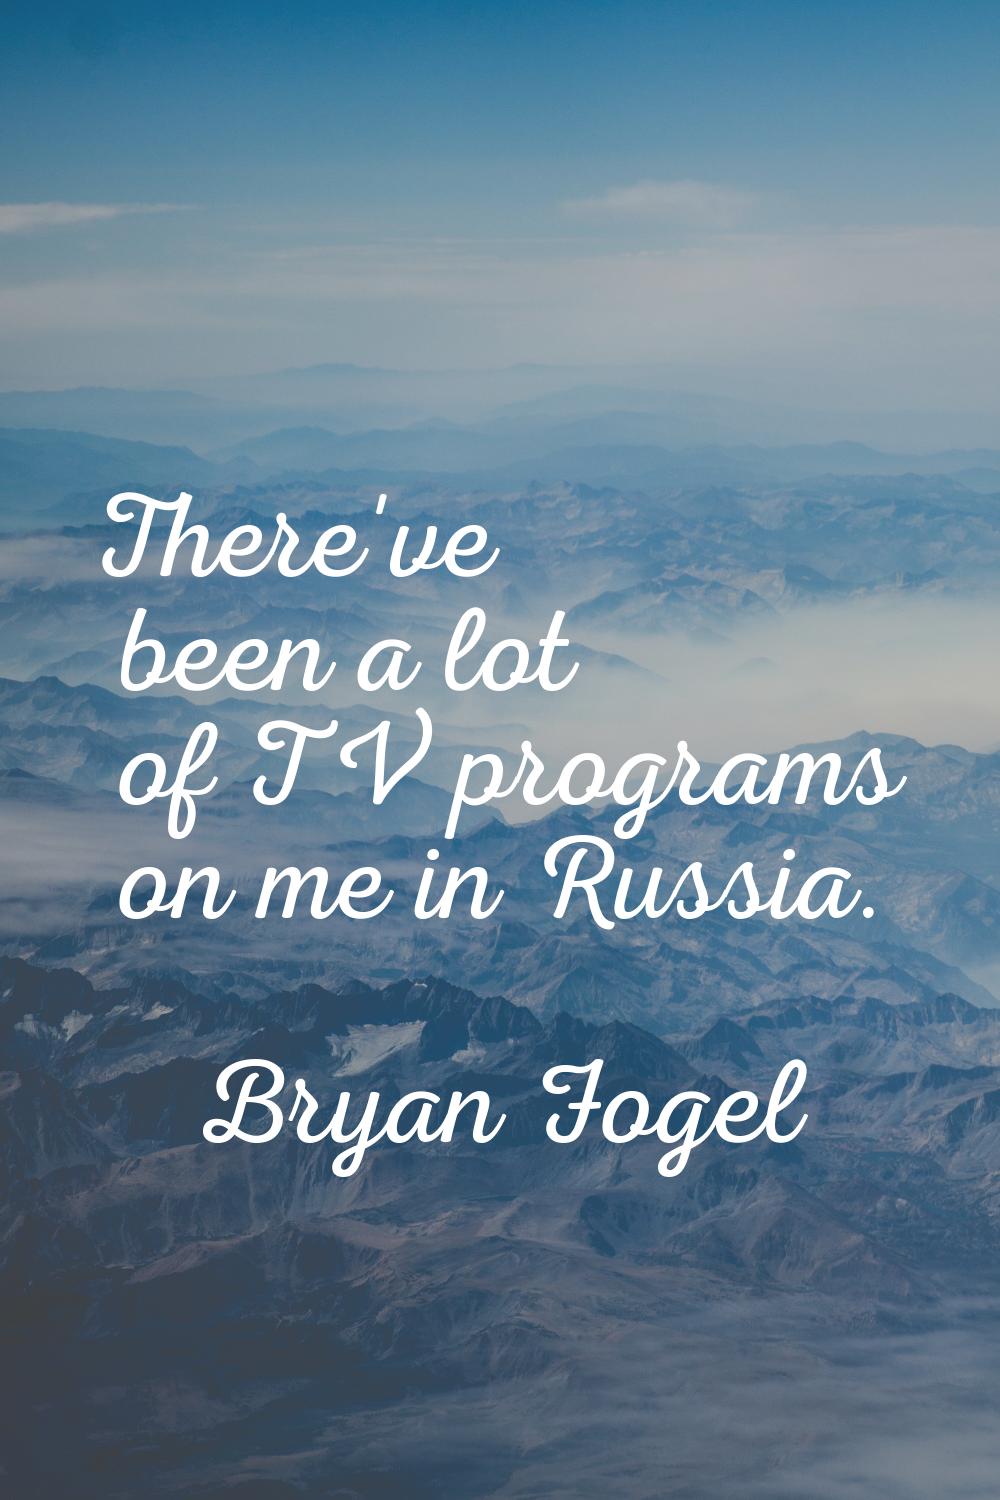 There've been a lot of TV programs on me in Russia.